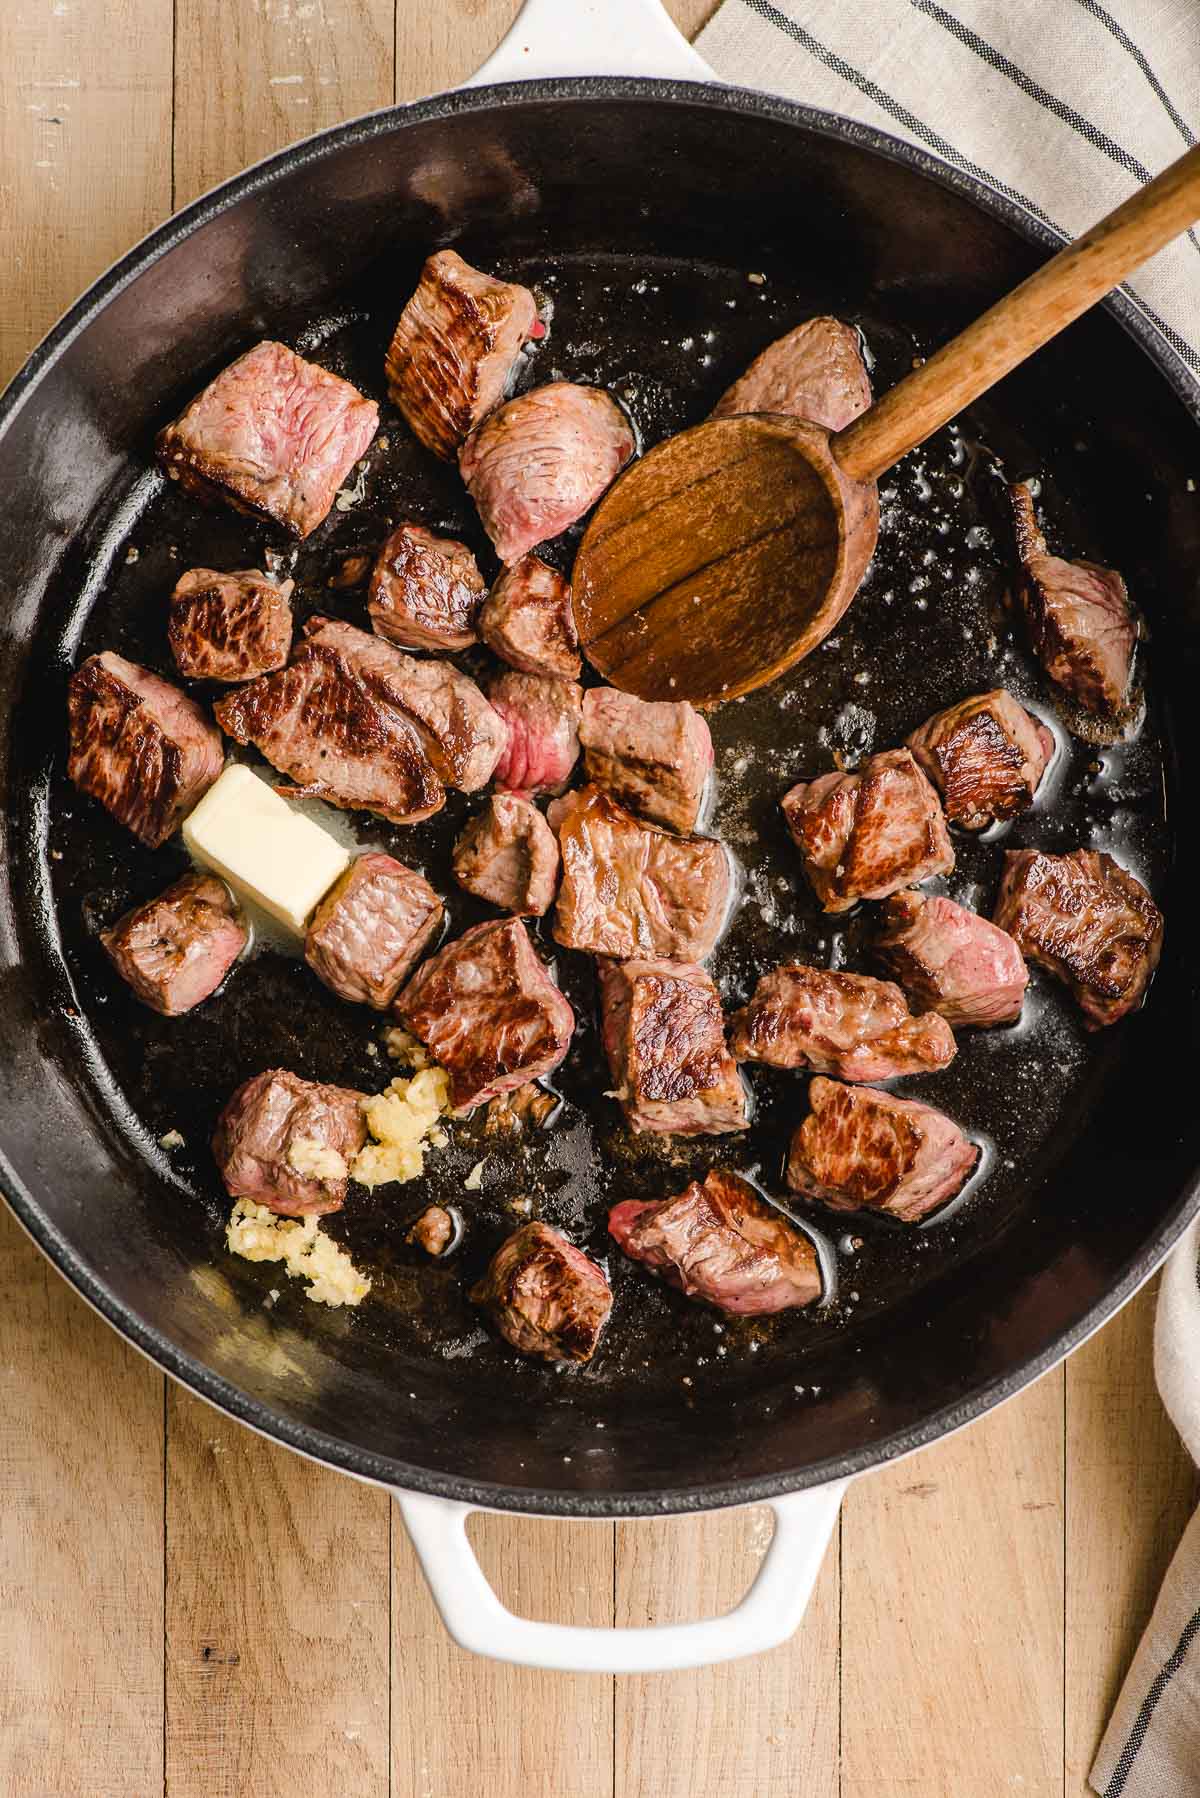 Hibachi steak bites shown cooking in a skillet with a pat of butter and minced garlic.